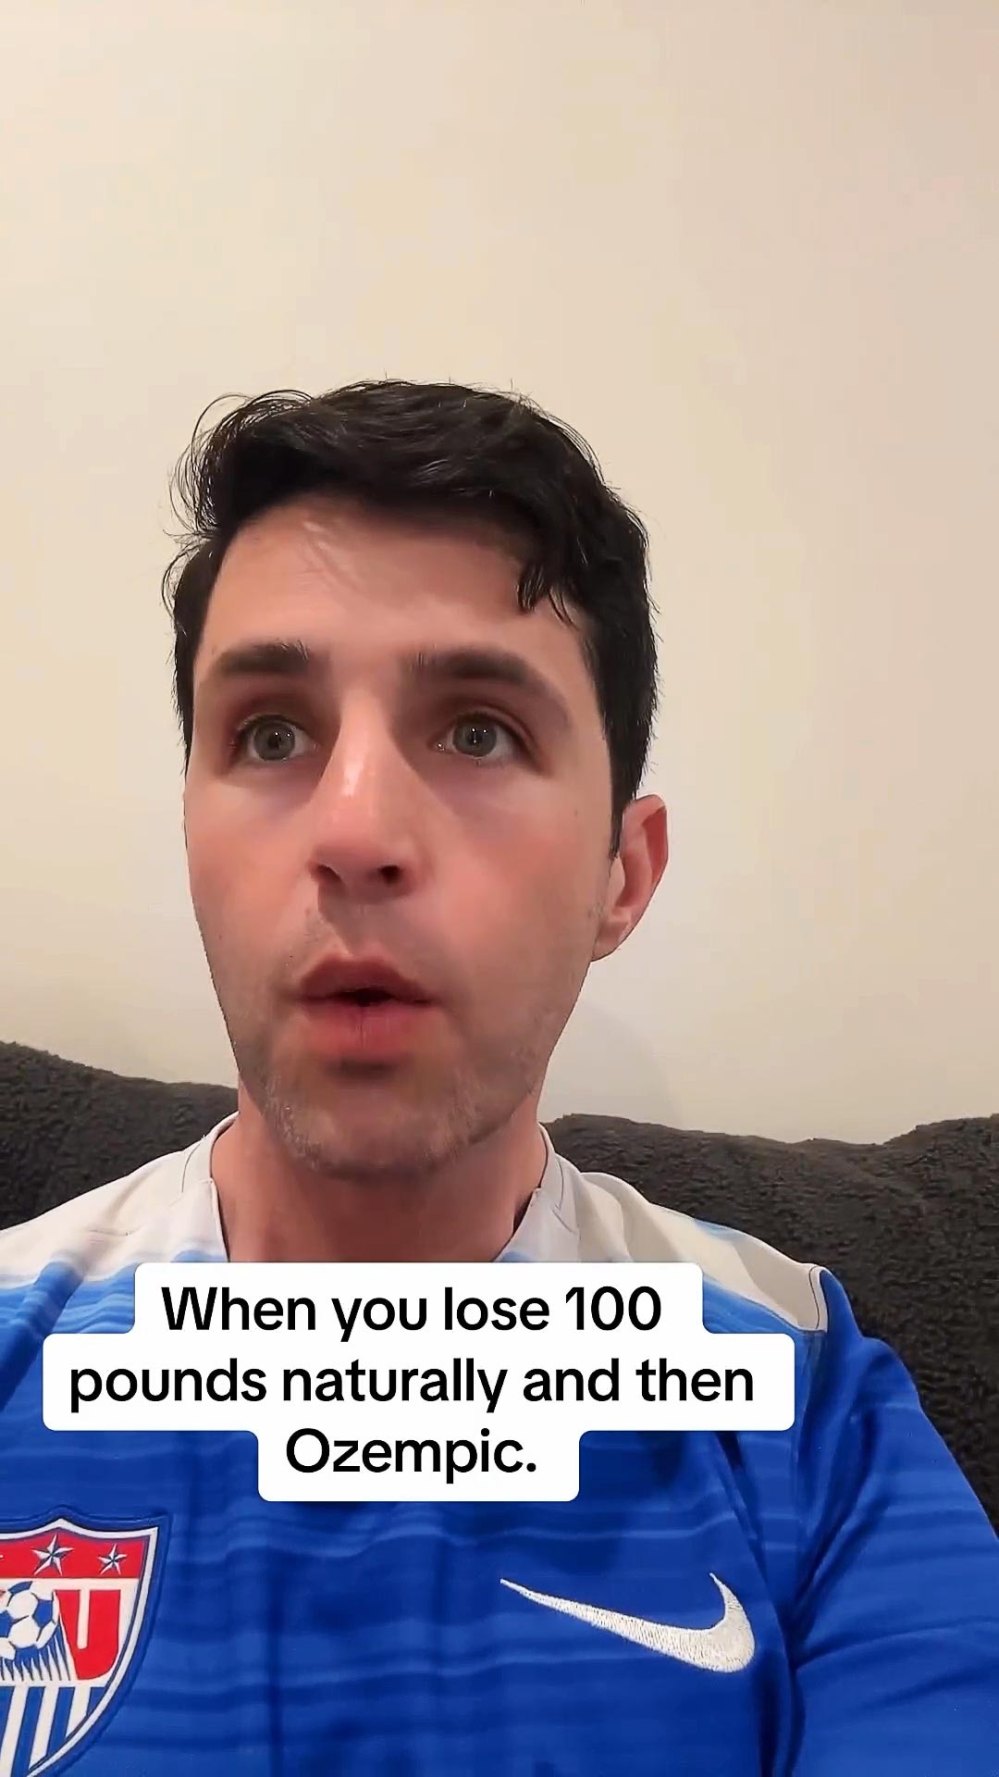 Josh Peck Pokes Fun At Himself For Losing Weight Naturally Before the Ozempic Trend 790